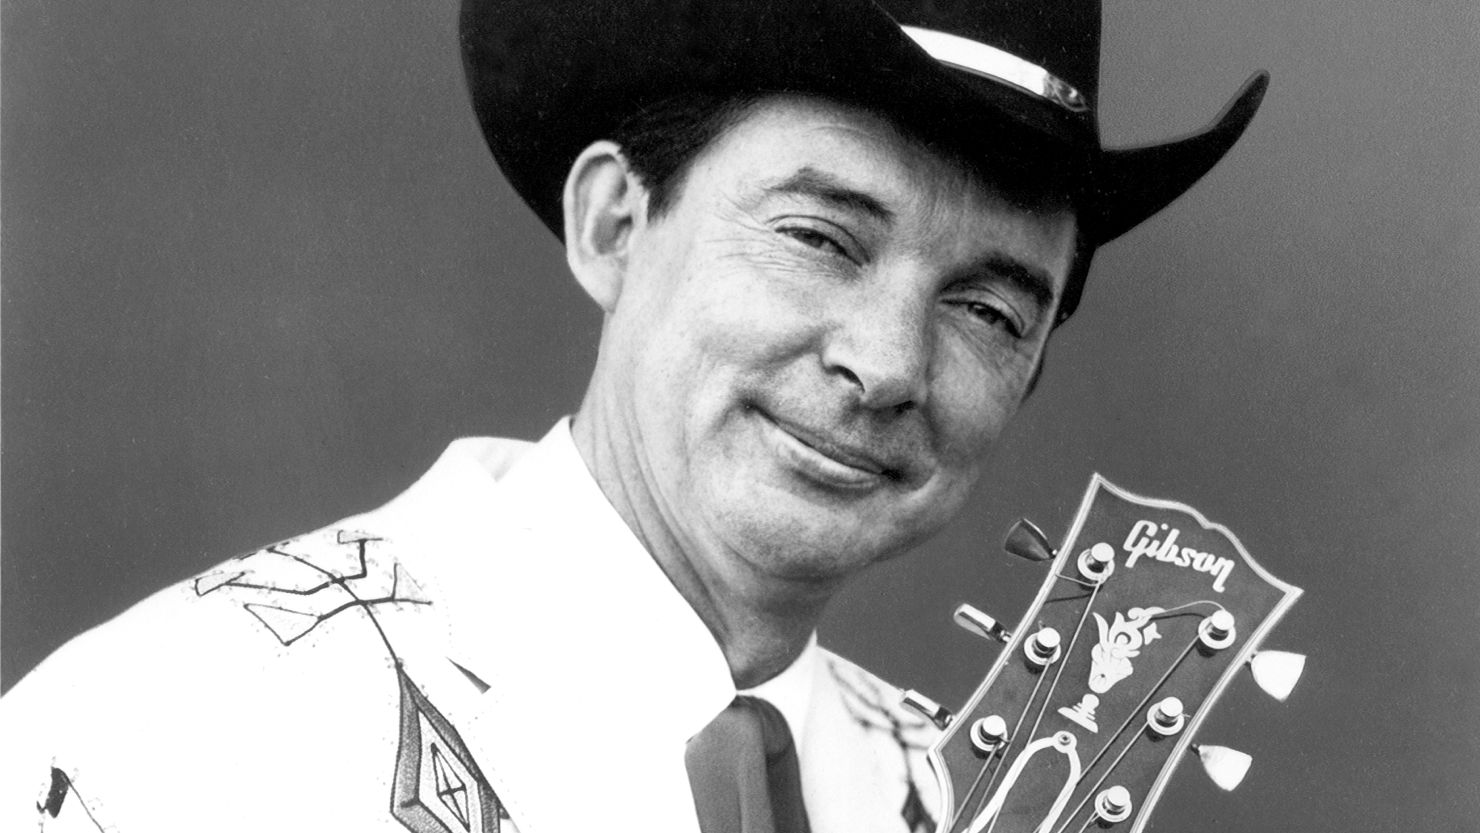 Ray Price was inducted into the Country Music Hall of Fame.